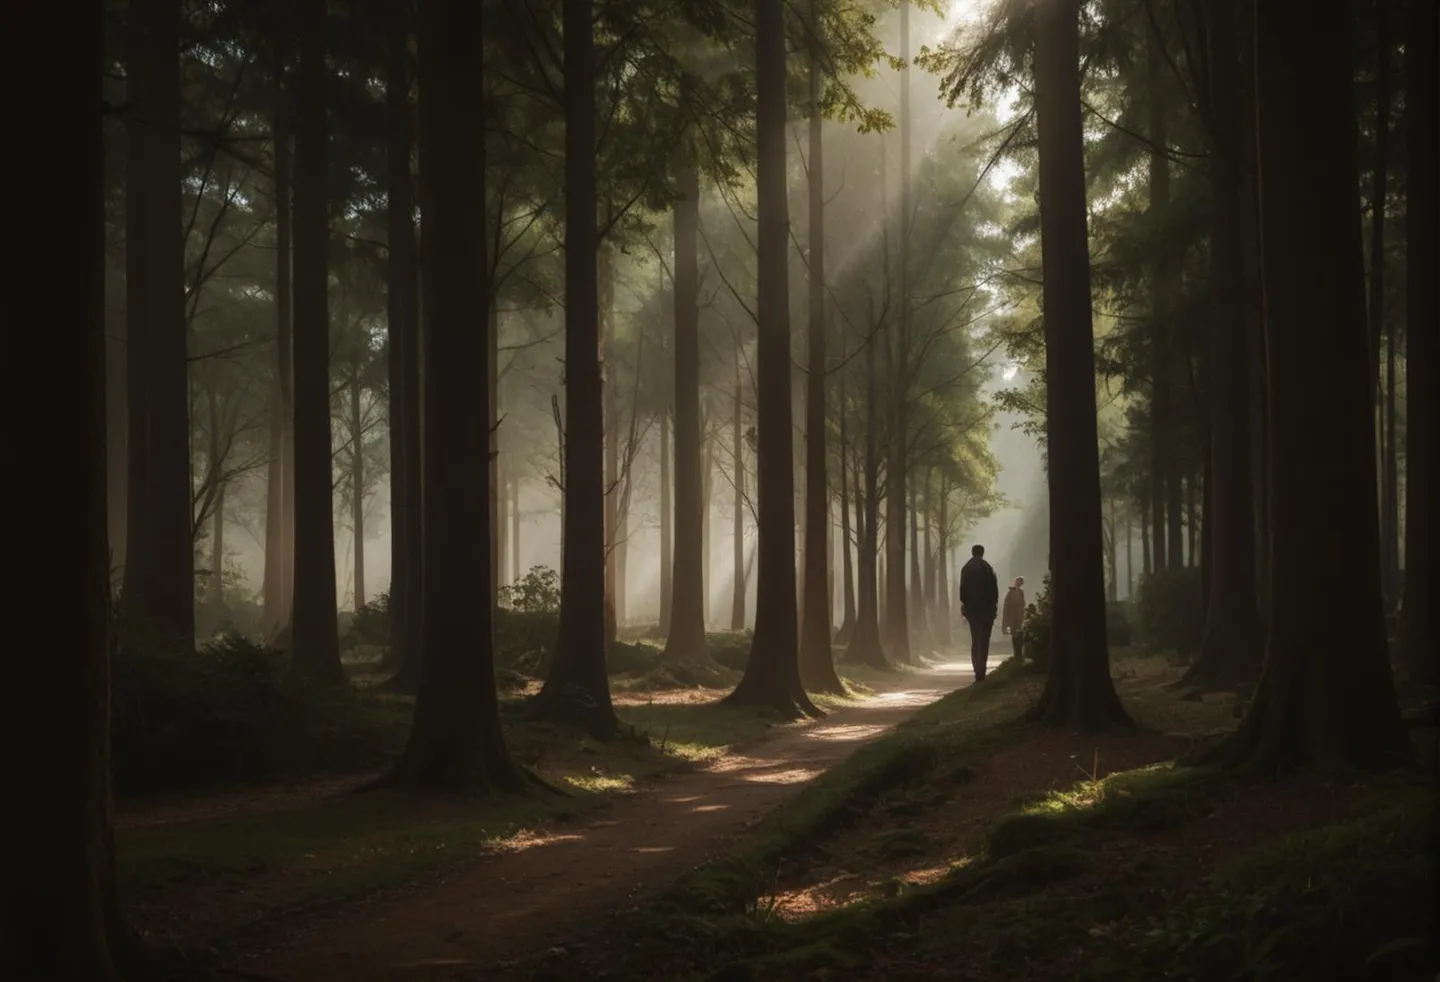 A serene AI generated image featuring a forest path illuminated by sunlight rays, created using stable diffusion.